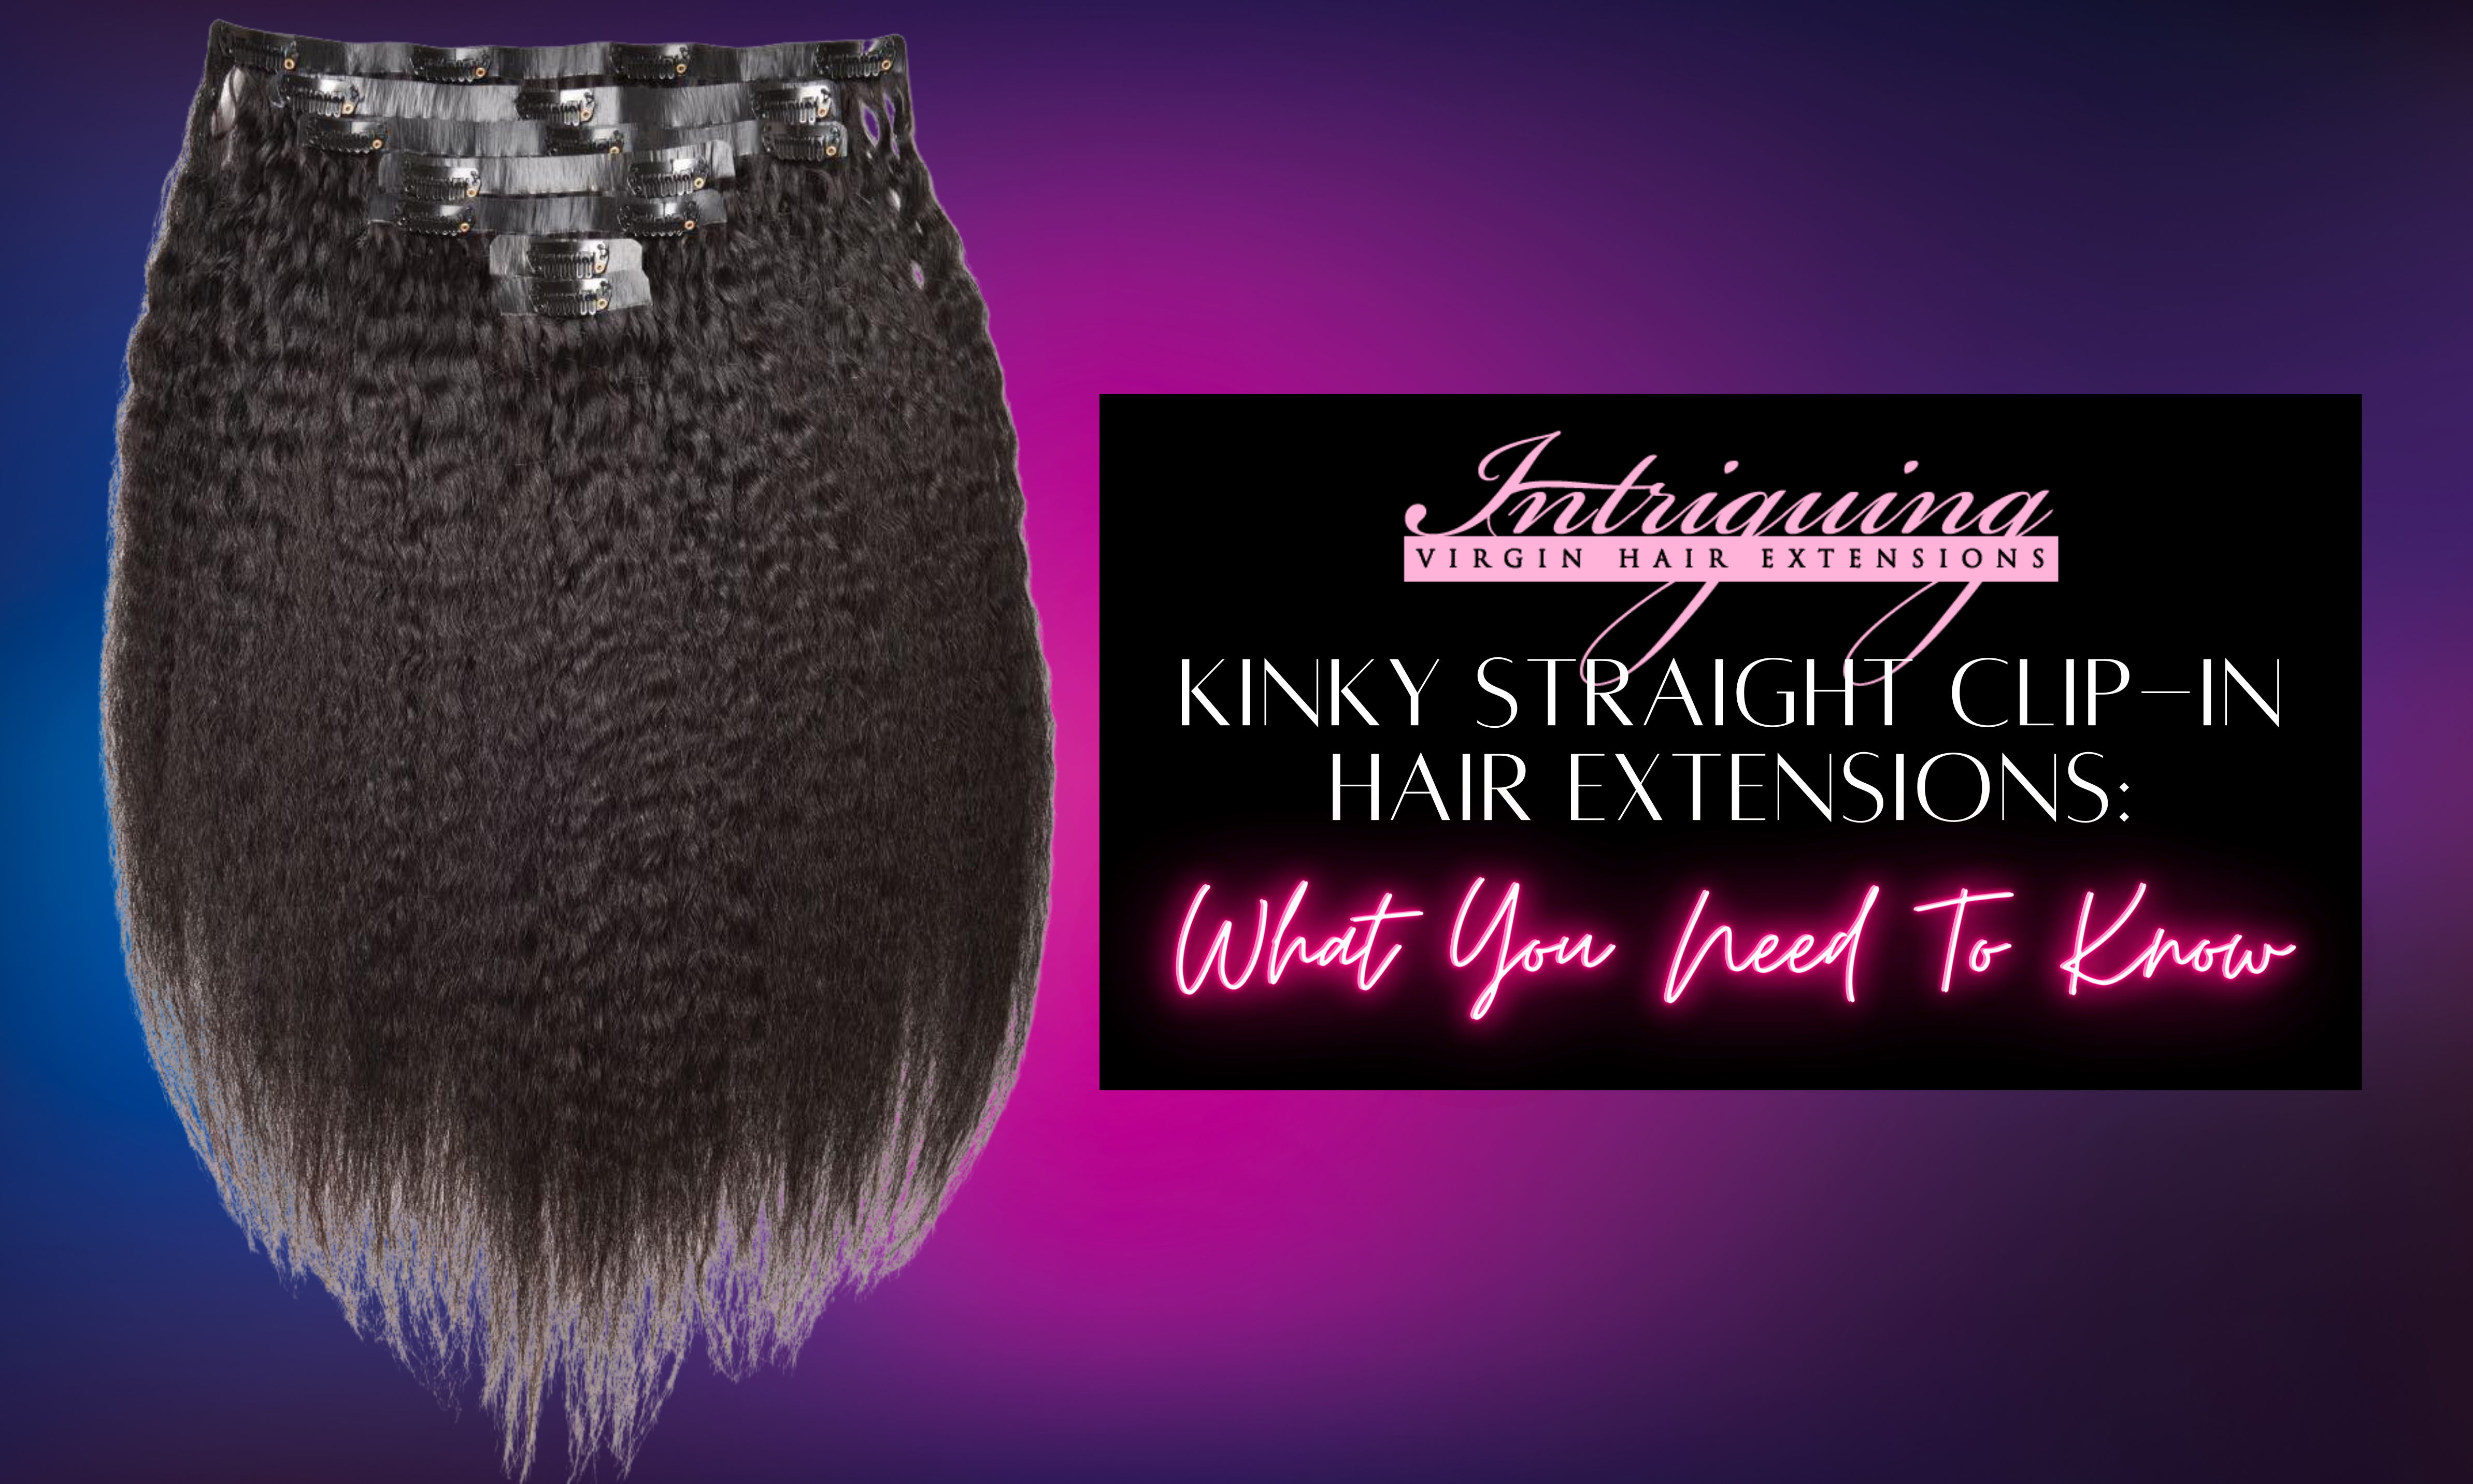 Kinky Straight Clip-in Hair Extensions: What You Need To Know